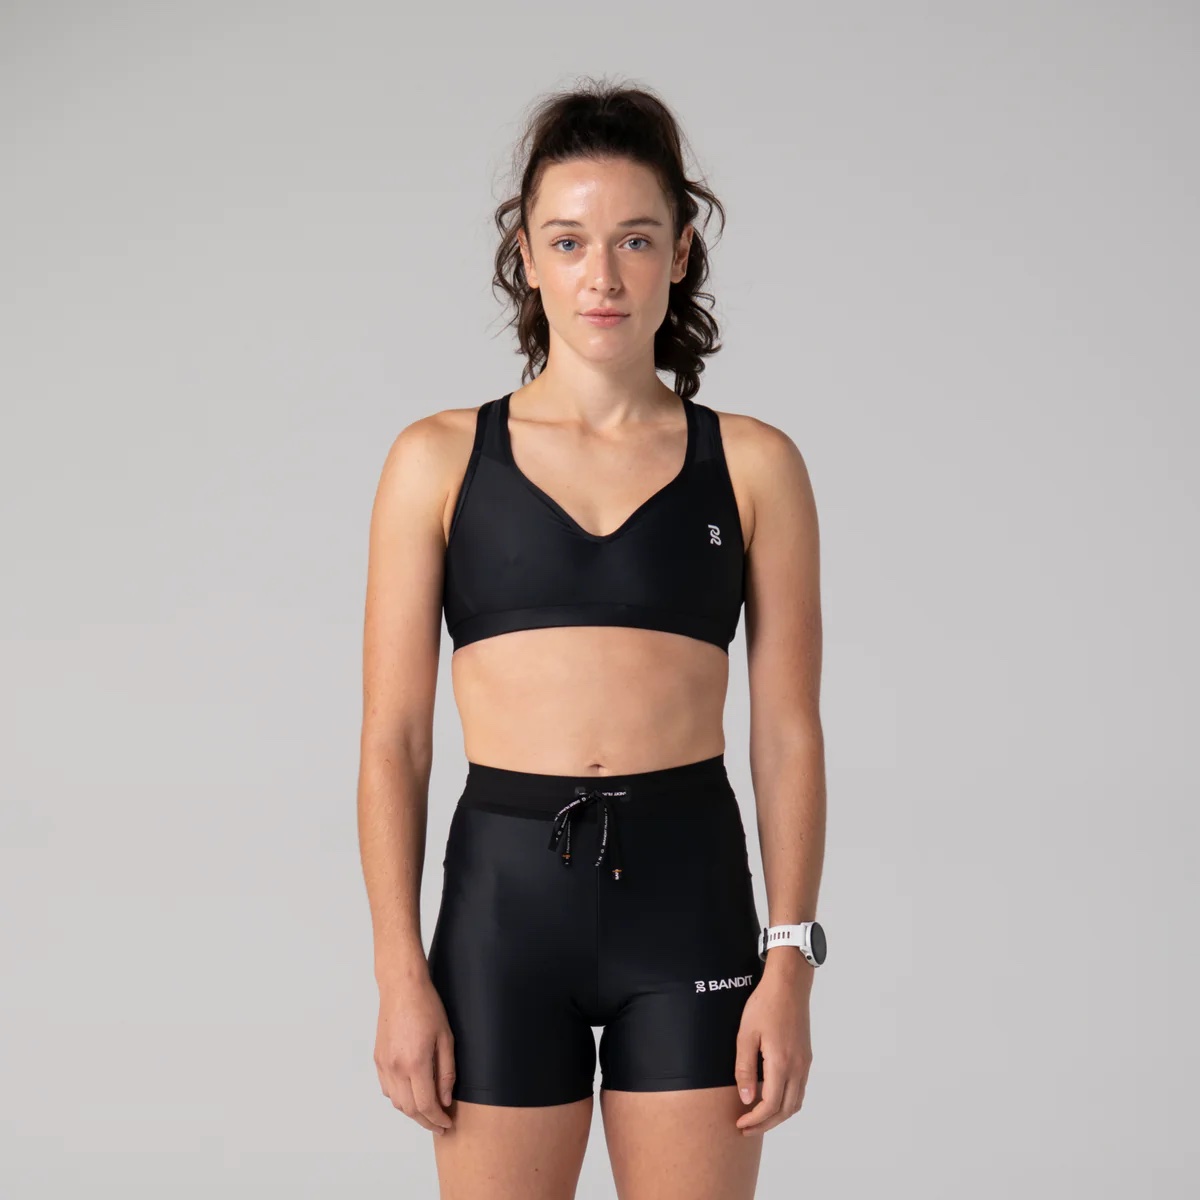 8 Sports Bras For Small Chests Cool Enough For The Gym OR The 'Gram